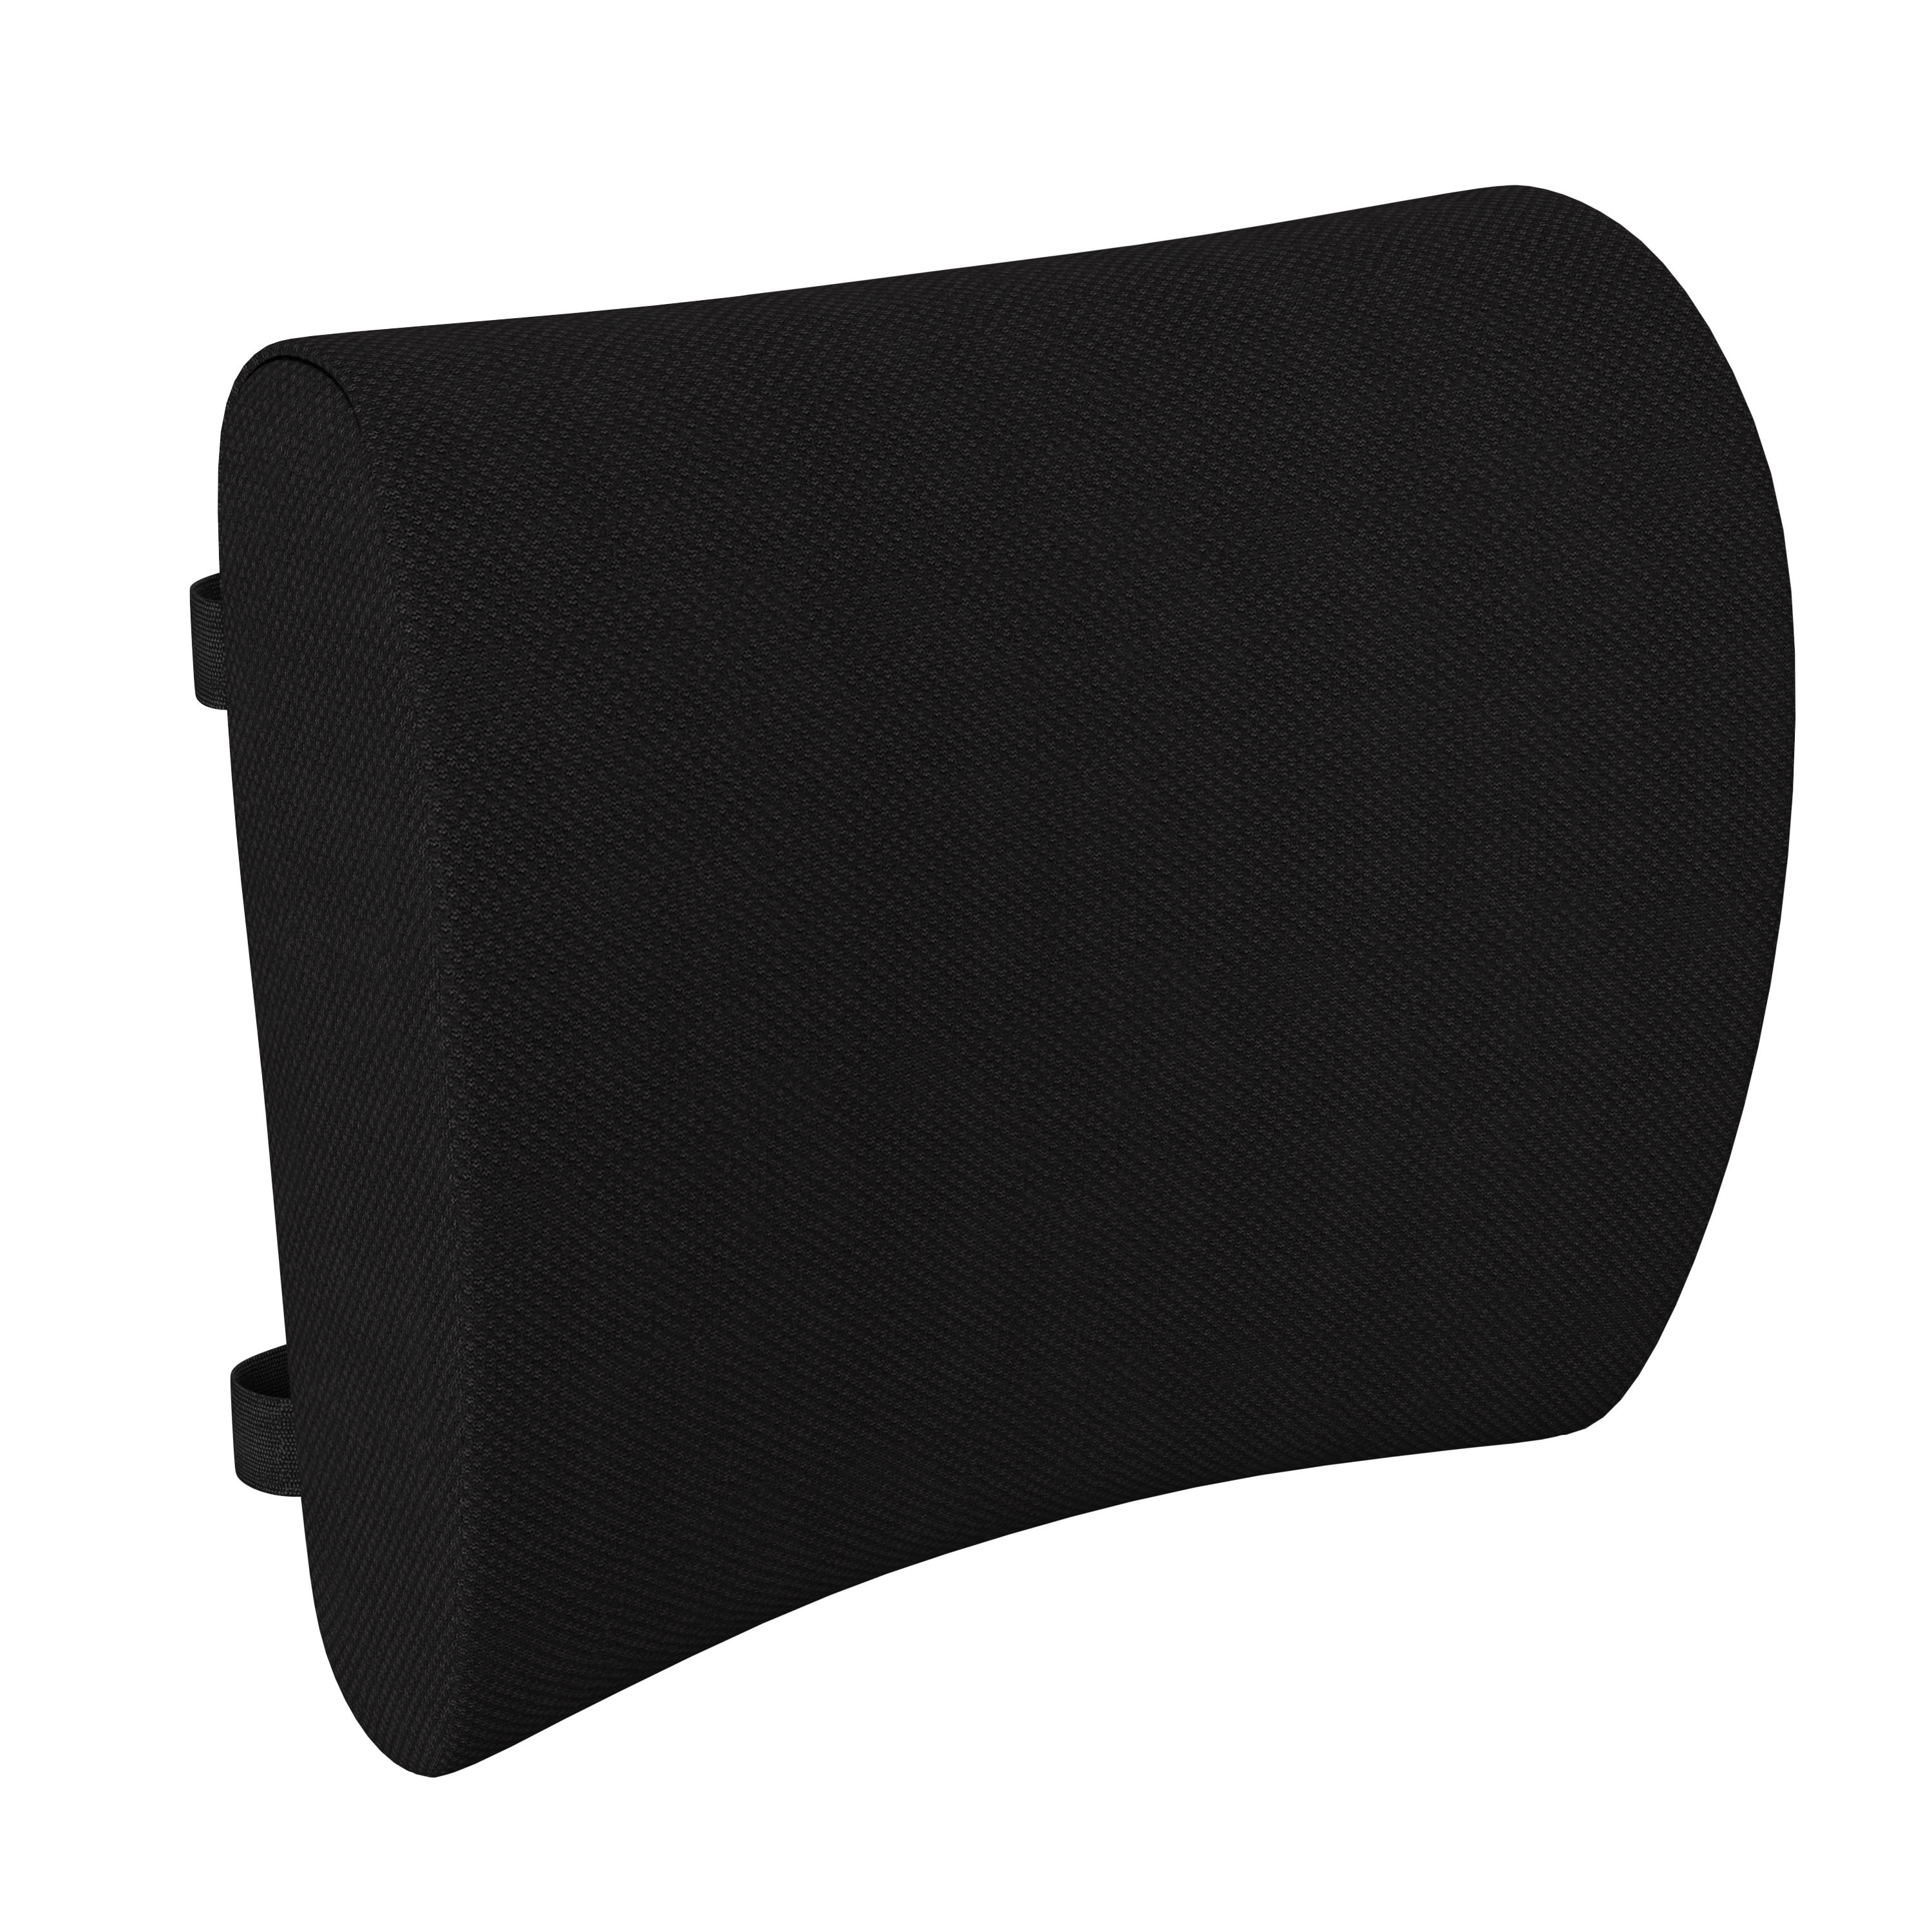 Comfort Lumbar Support Pillow for Office Chair Improve Posture While  Sitting - Memory Foam Cushion for Car